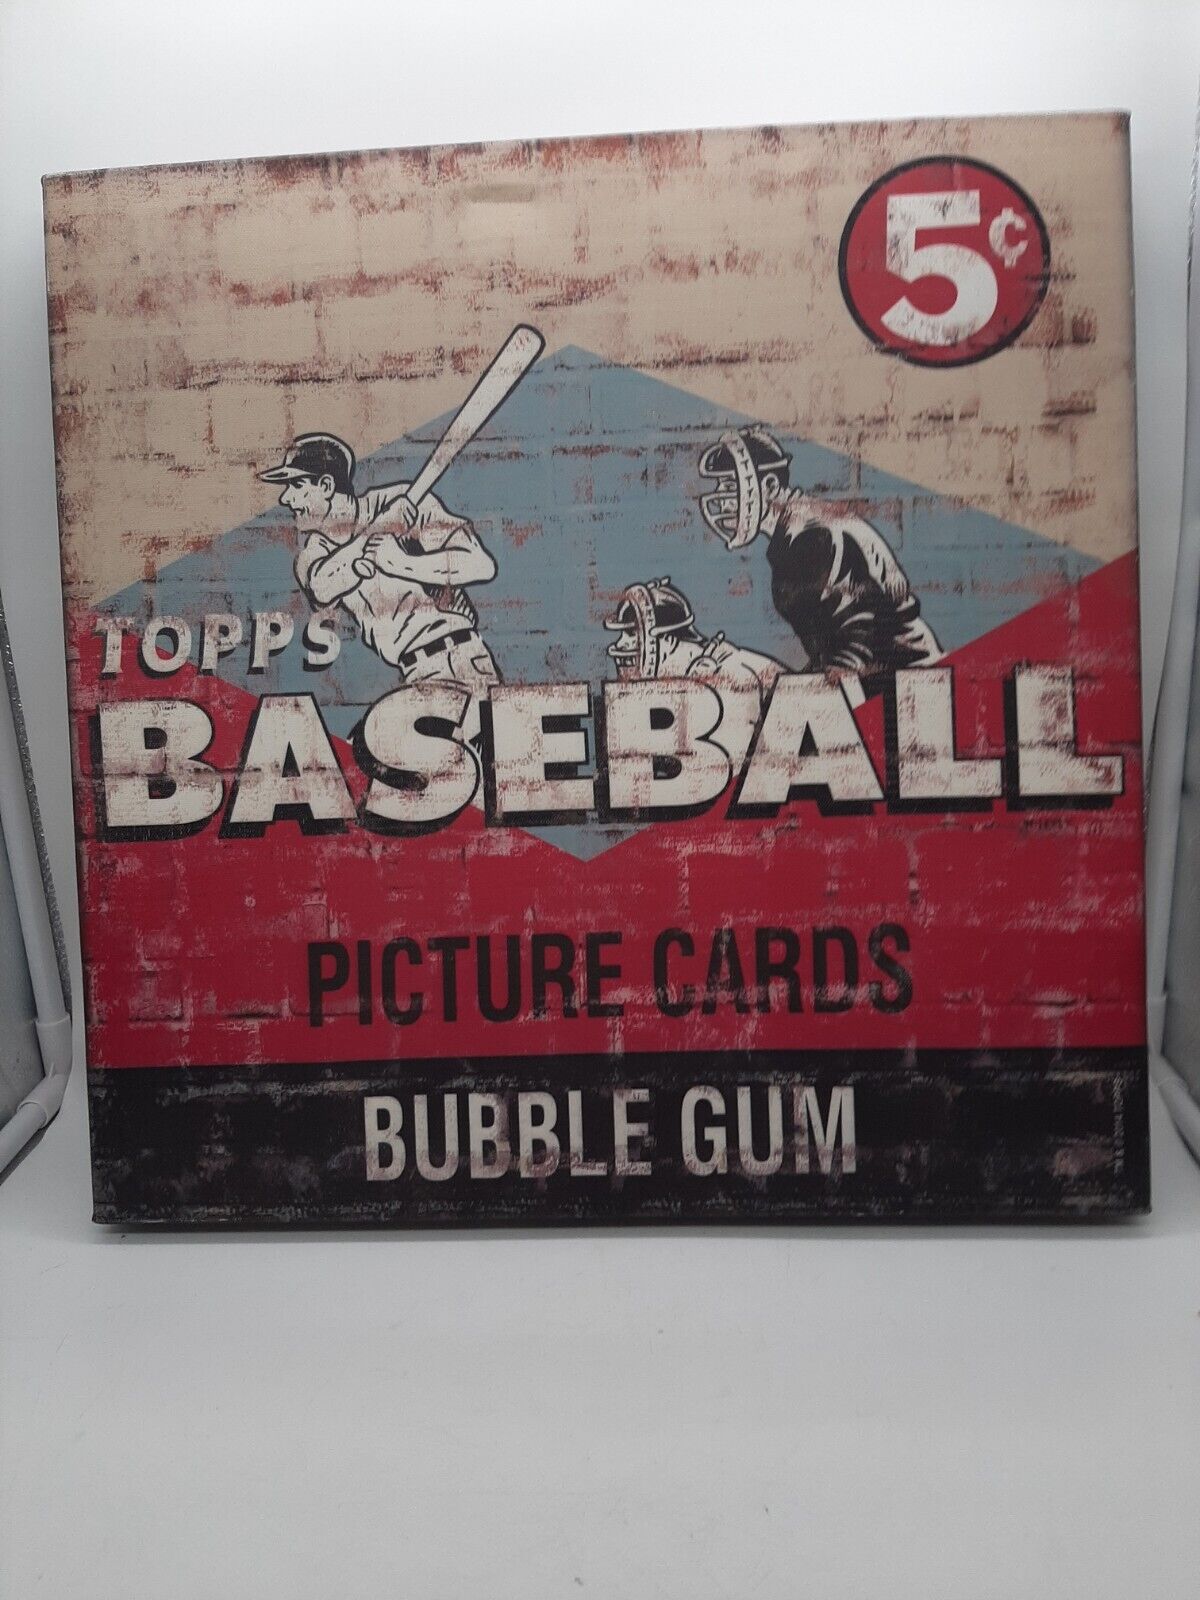 2015 Topps Baseball PICTURE CARDS Bubble Gum Vintage Retro Picture ad  16x16